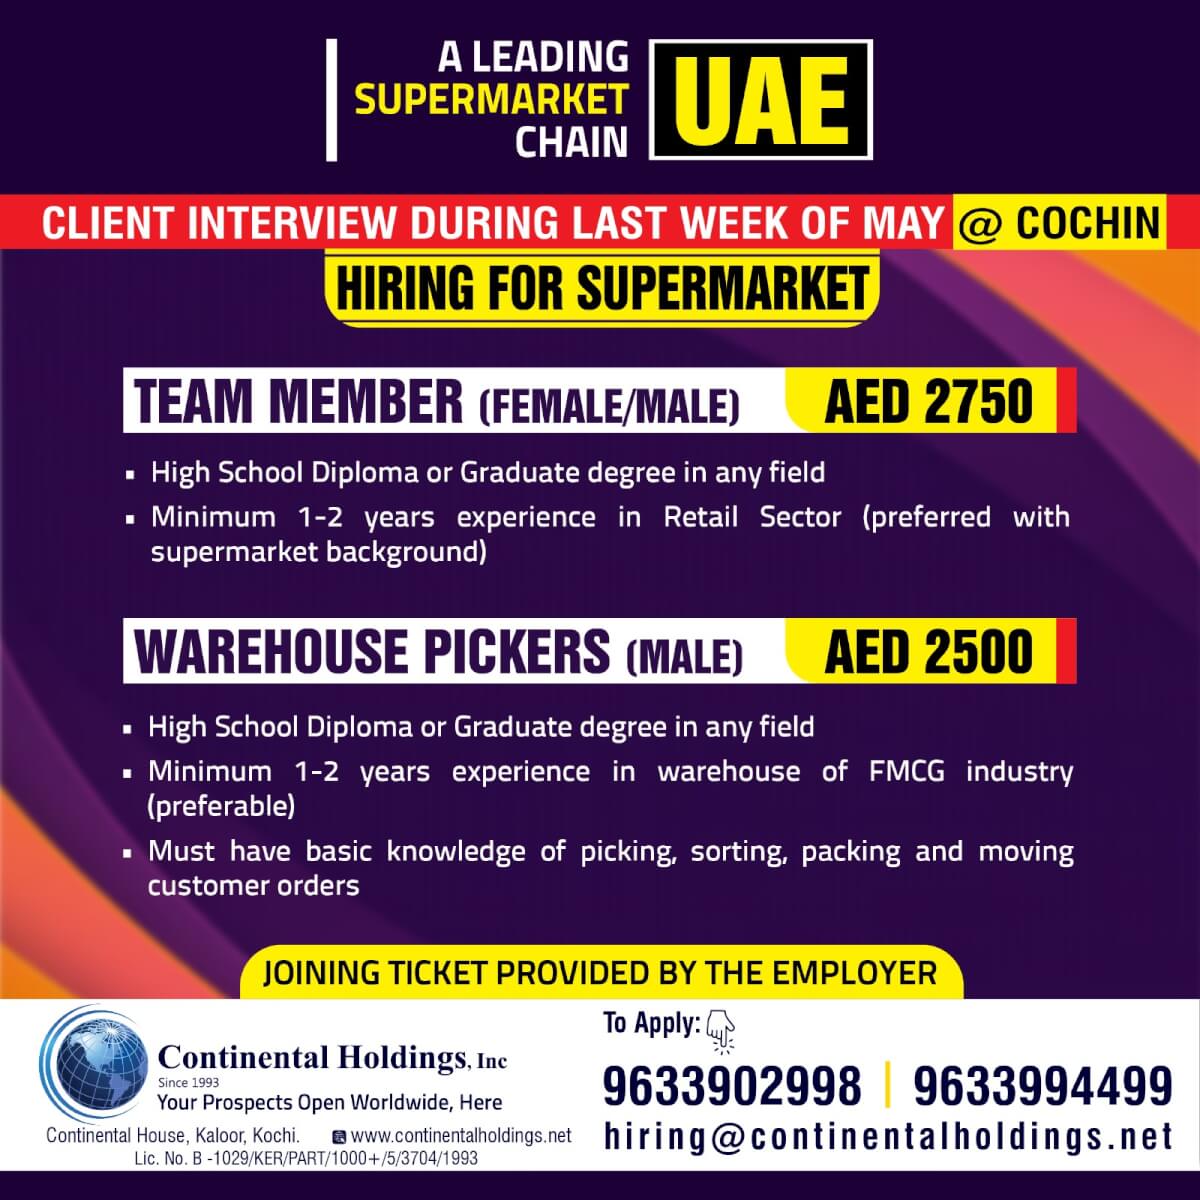 Hiring for a Supermaket Chain in UAE - Direct Client Interview at Cochin - Last Week of May